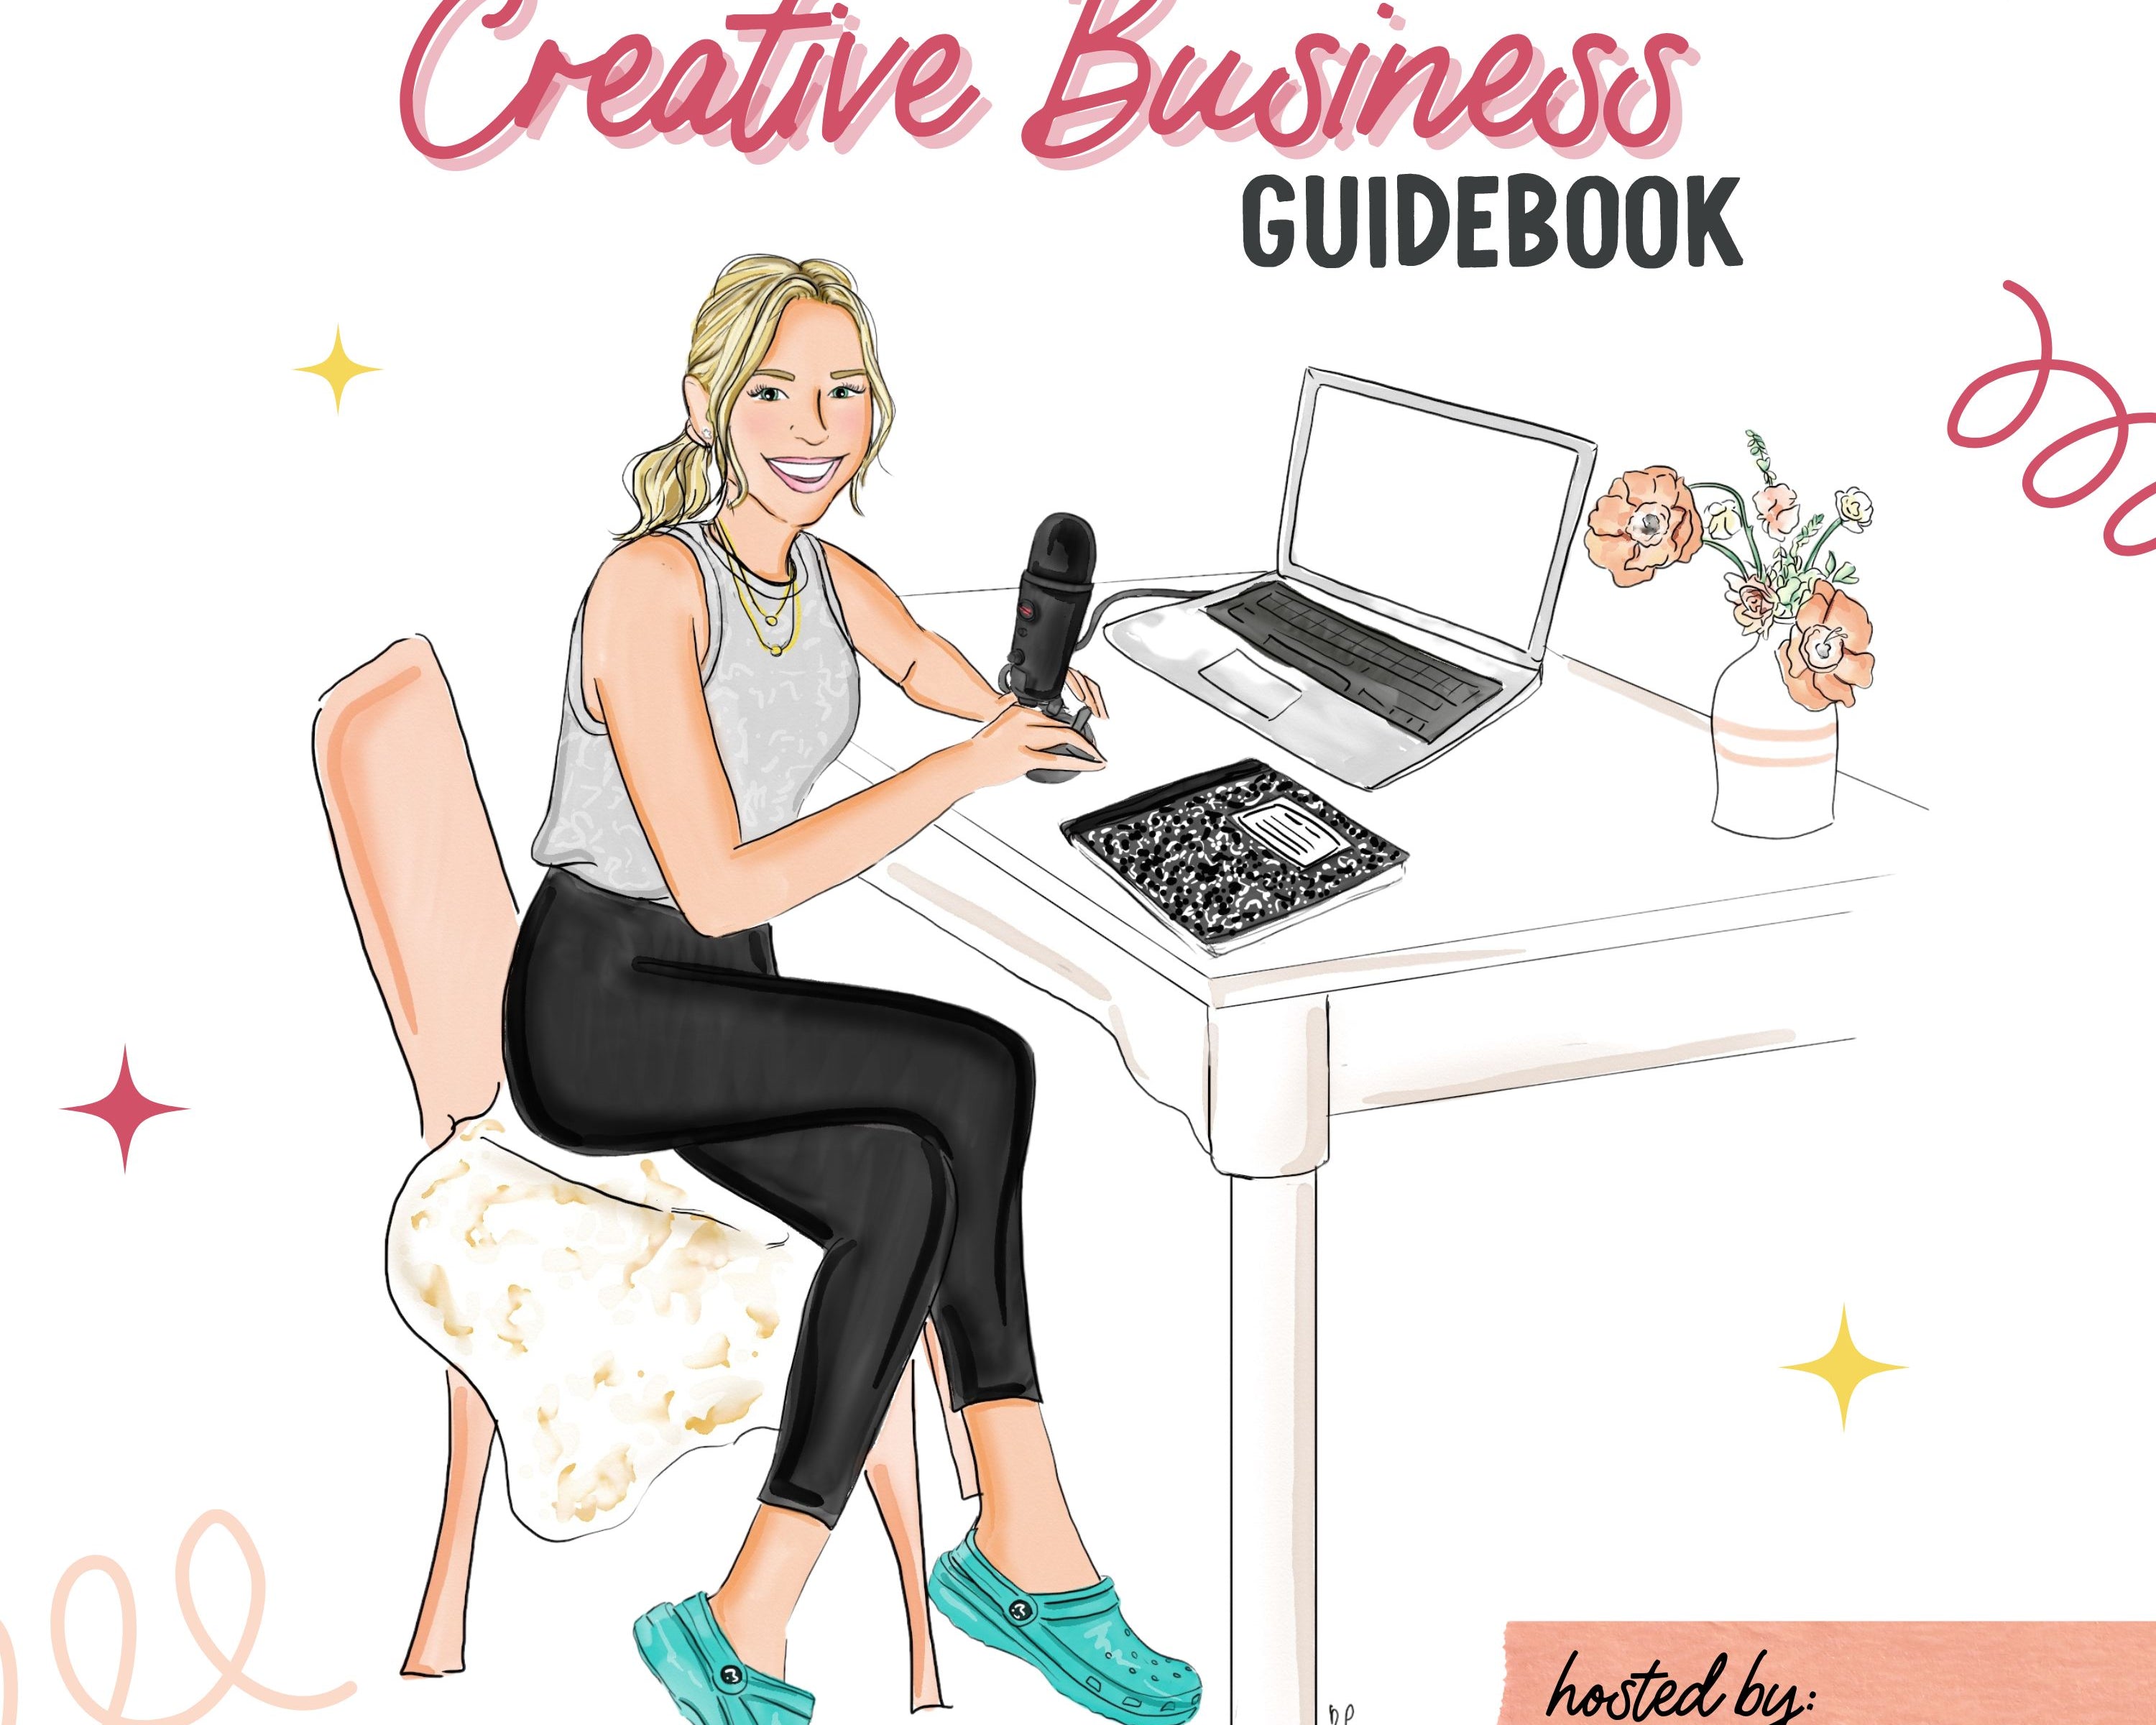 Episode 1: Introduction to Julia's Creative Business Guidebook